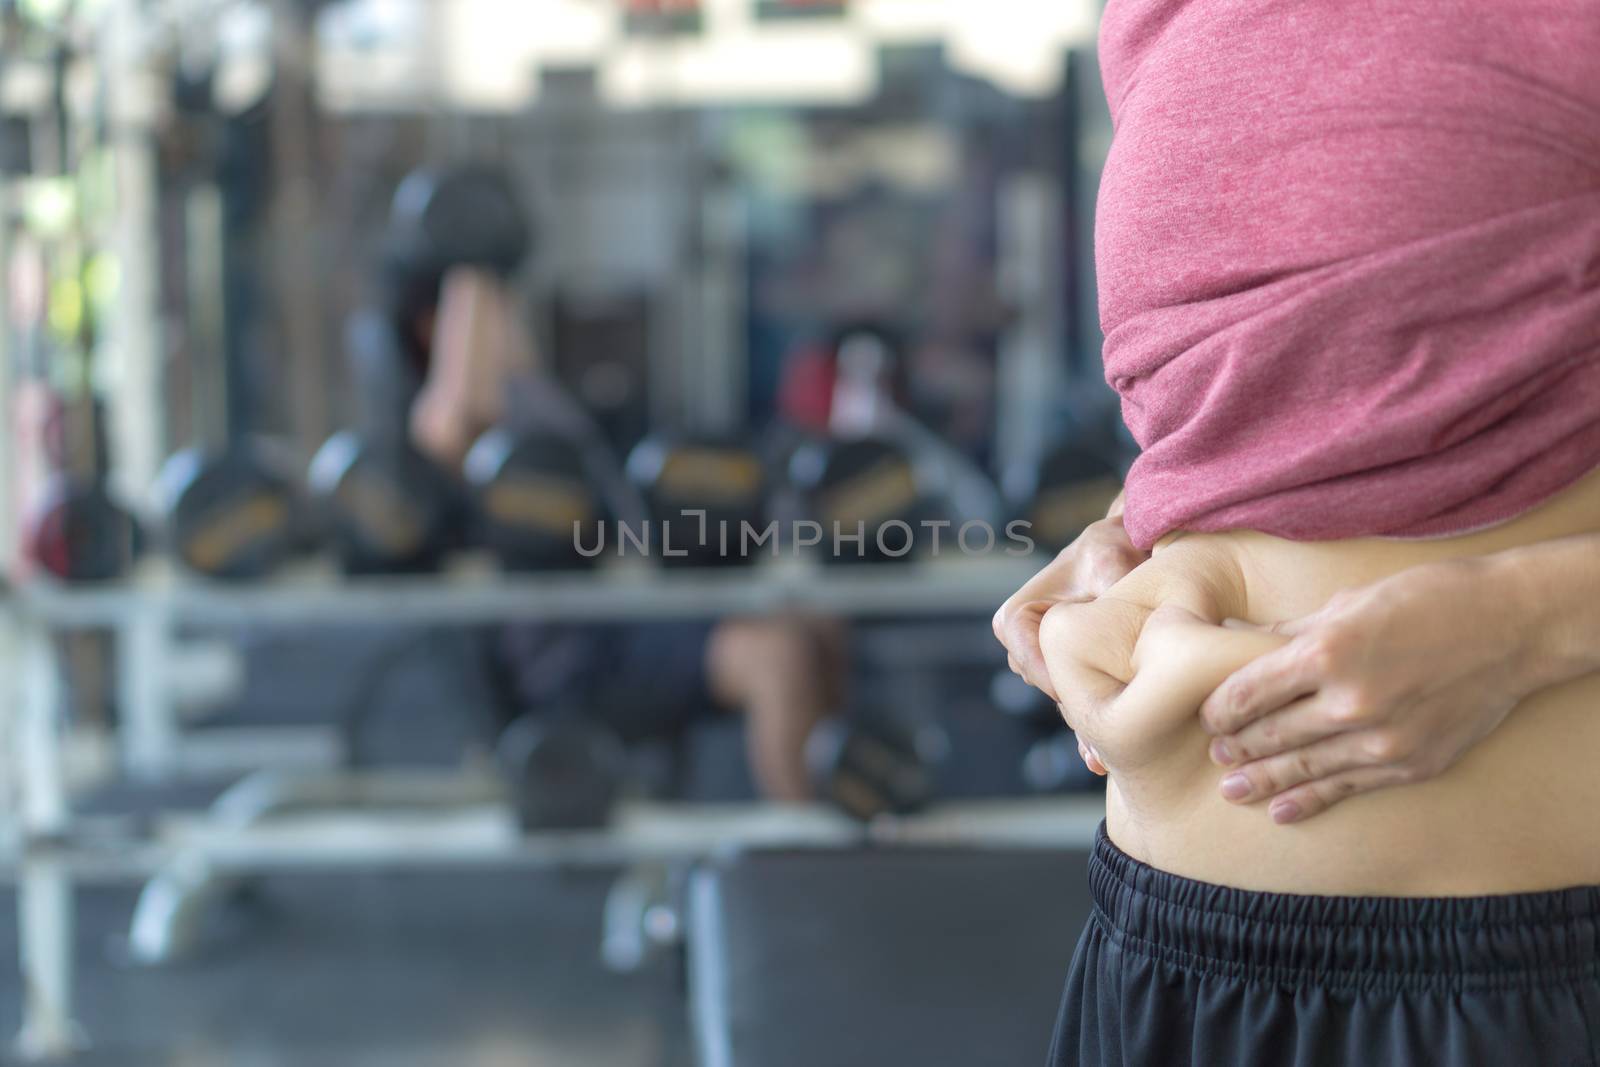 Close up man holding excessive fat belly. Man overweight abdomen. Man diet lifestyle concept reduce belly and shape up healthy stomach muscle. Weight loss, slim body, healthy lifestyle concept.